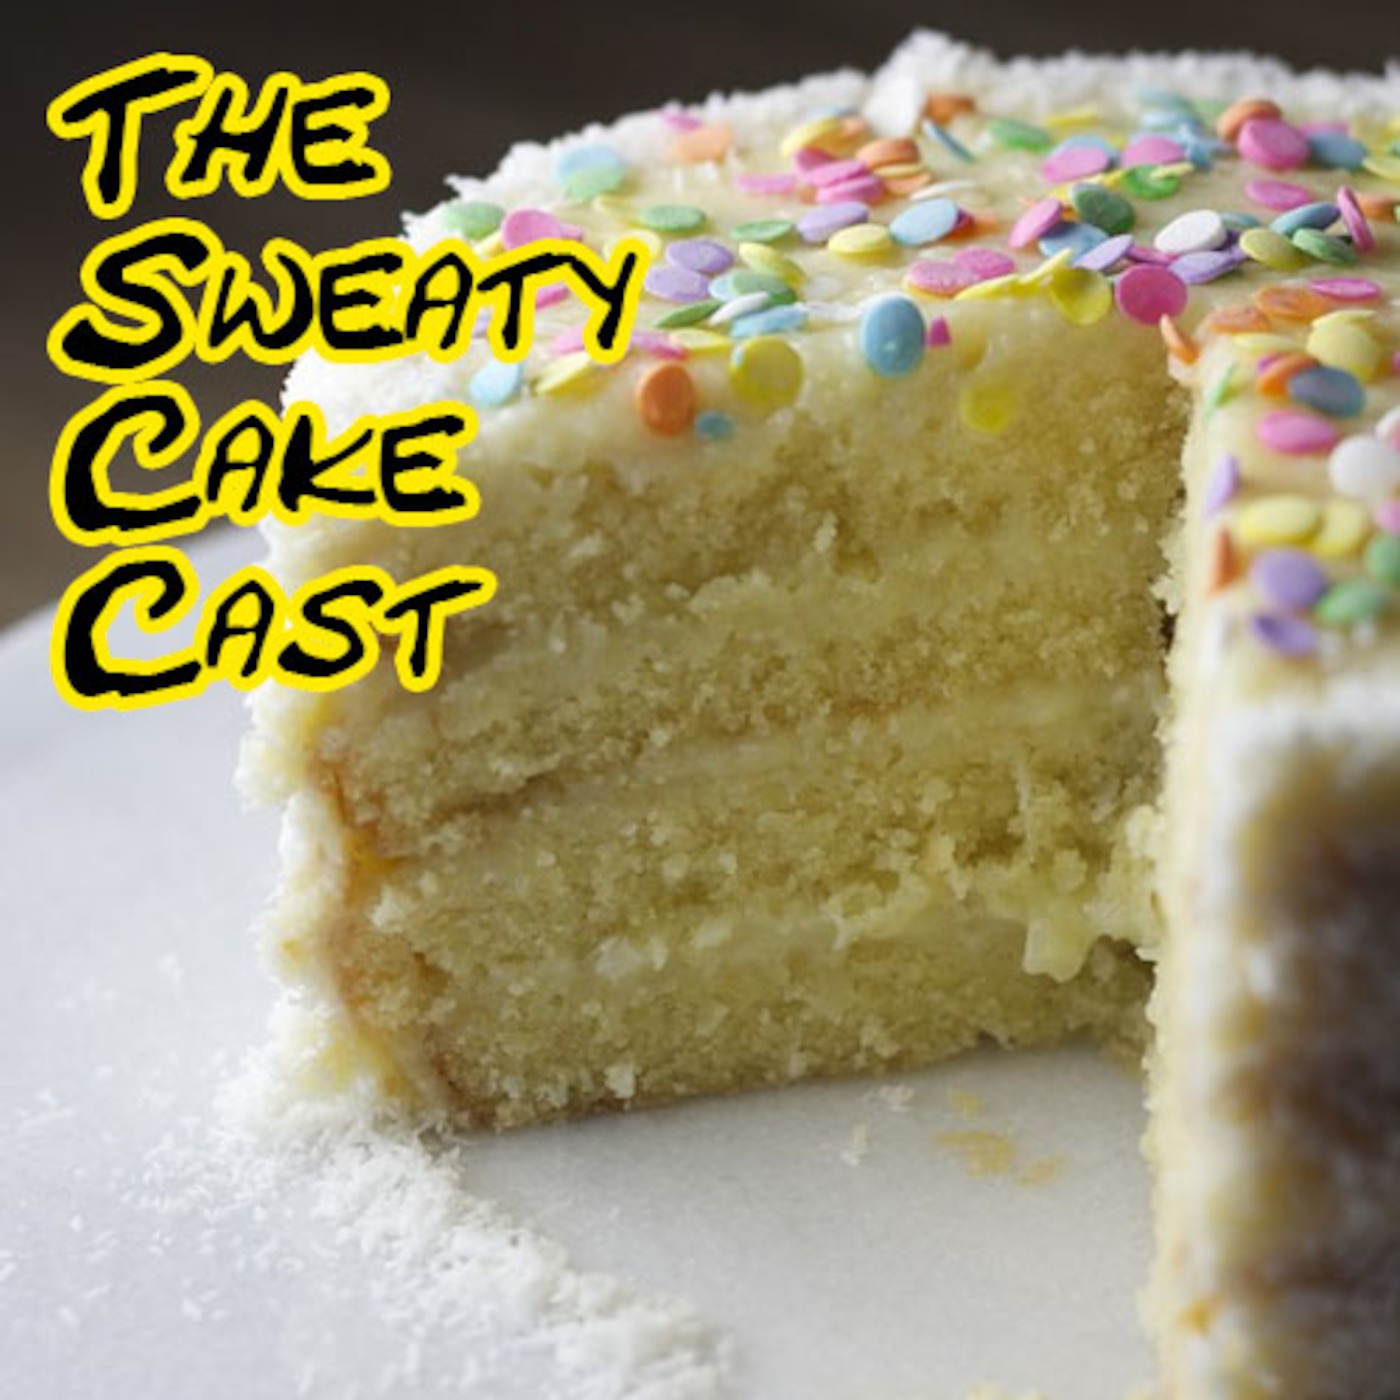 The Sweaty Cake Cast #2 - "Two Came Back"